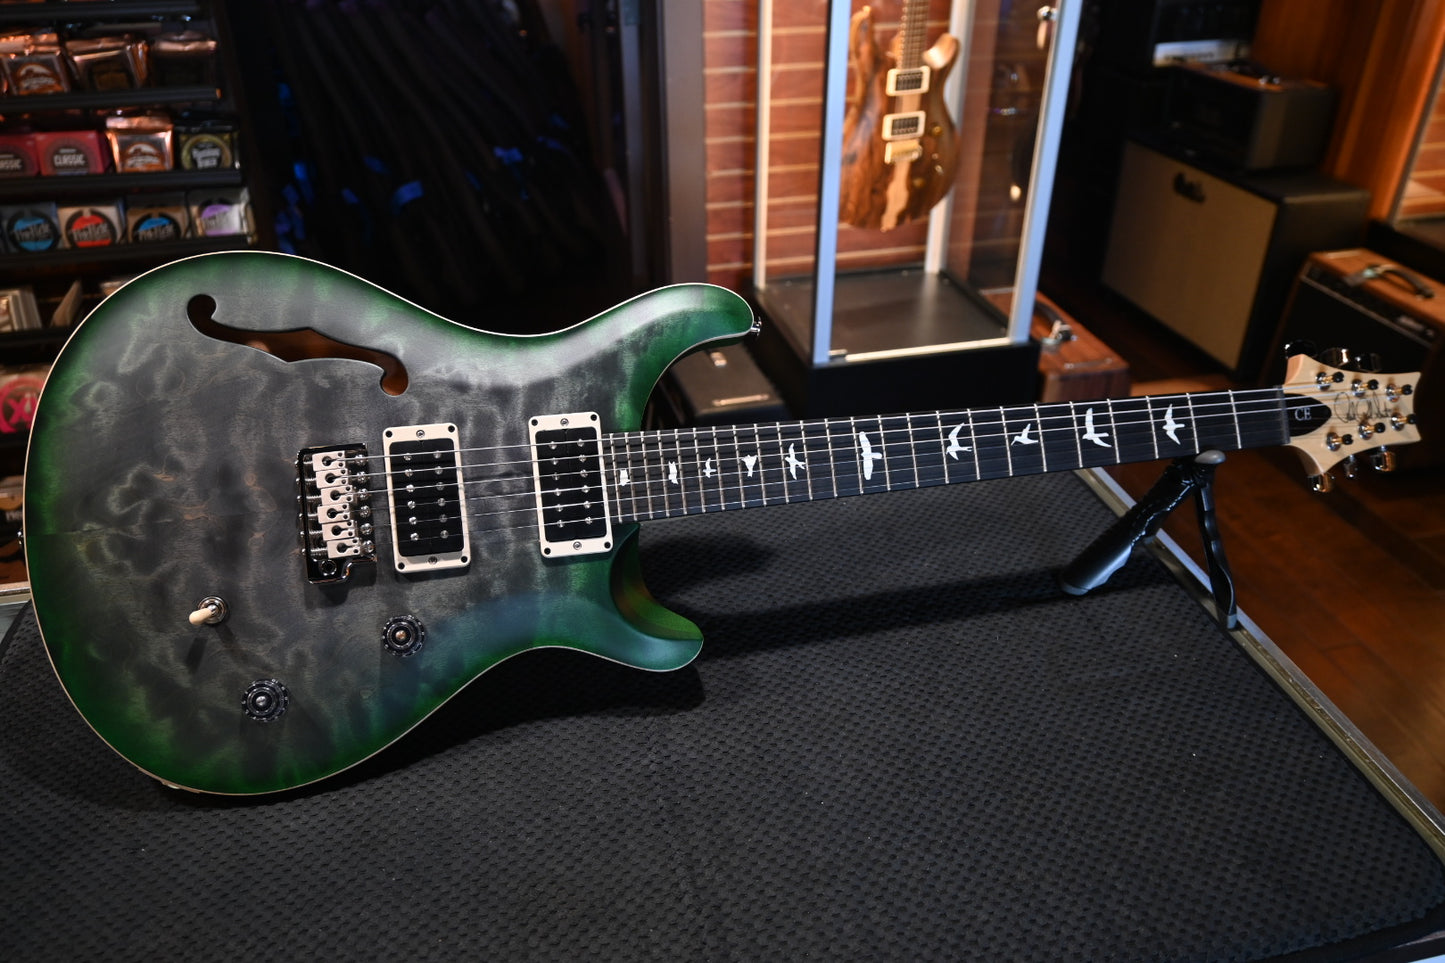 PRS Wood Library CE 24 Semi-Hollow Quilt - Faded Grey Black Green Burst Satin Guitar #0983 - Danville Music